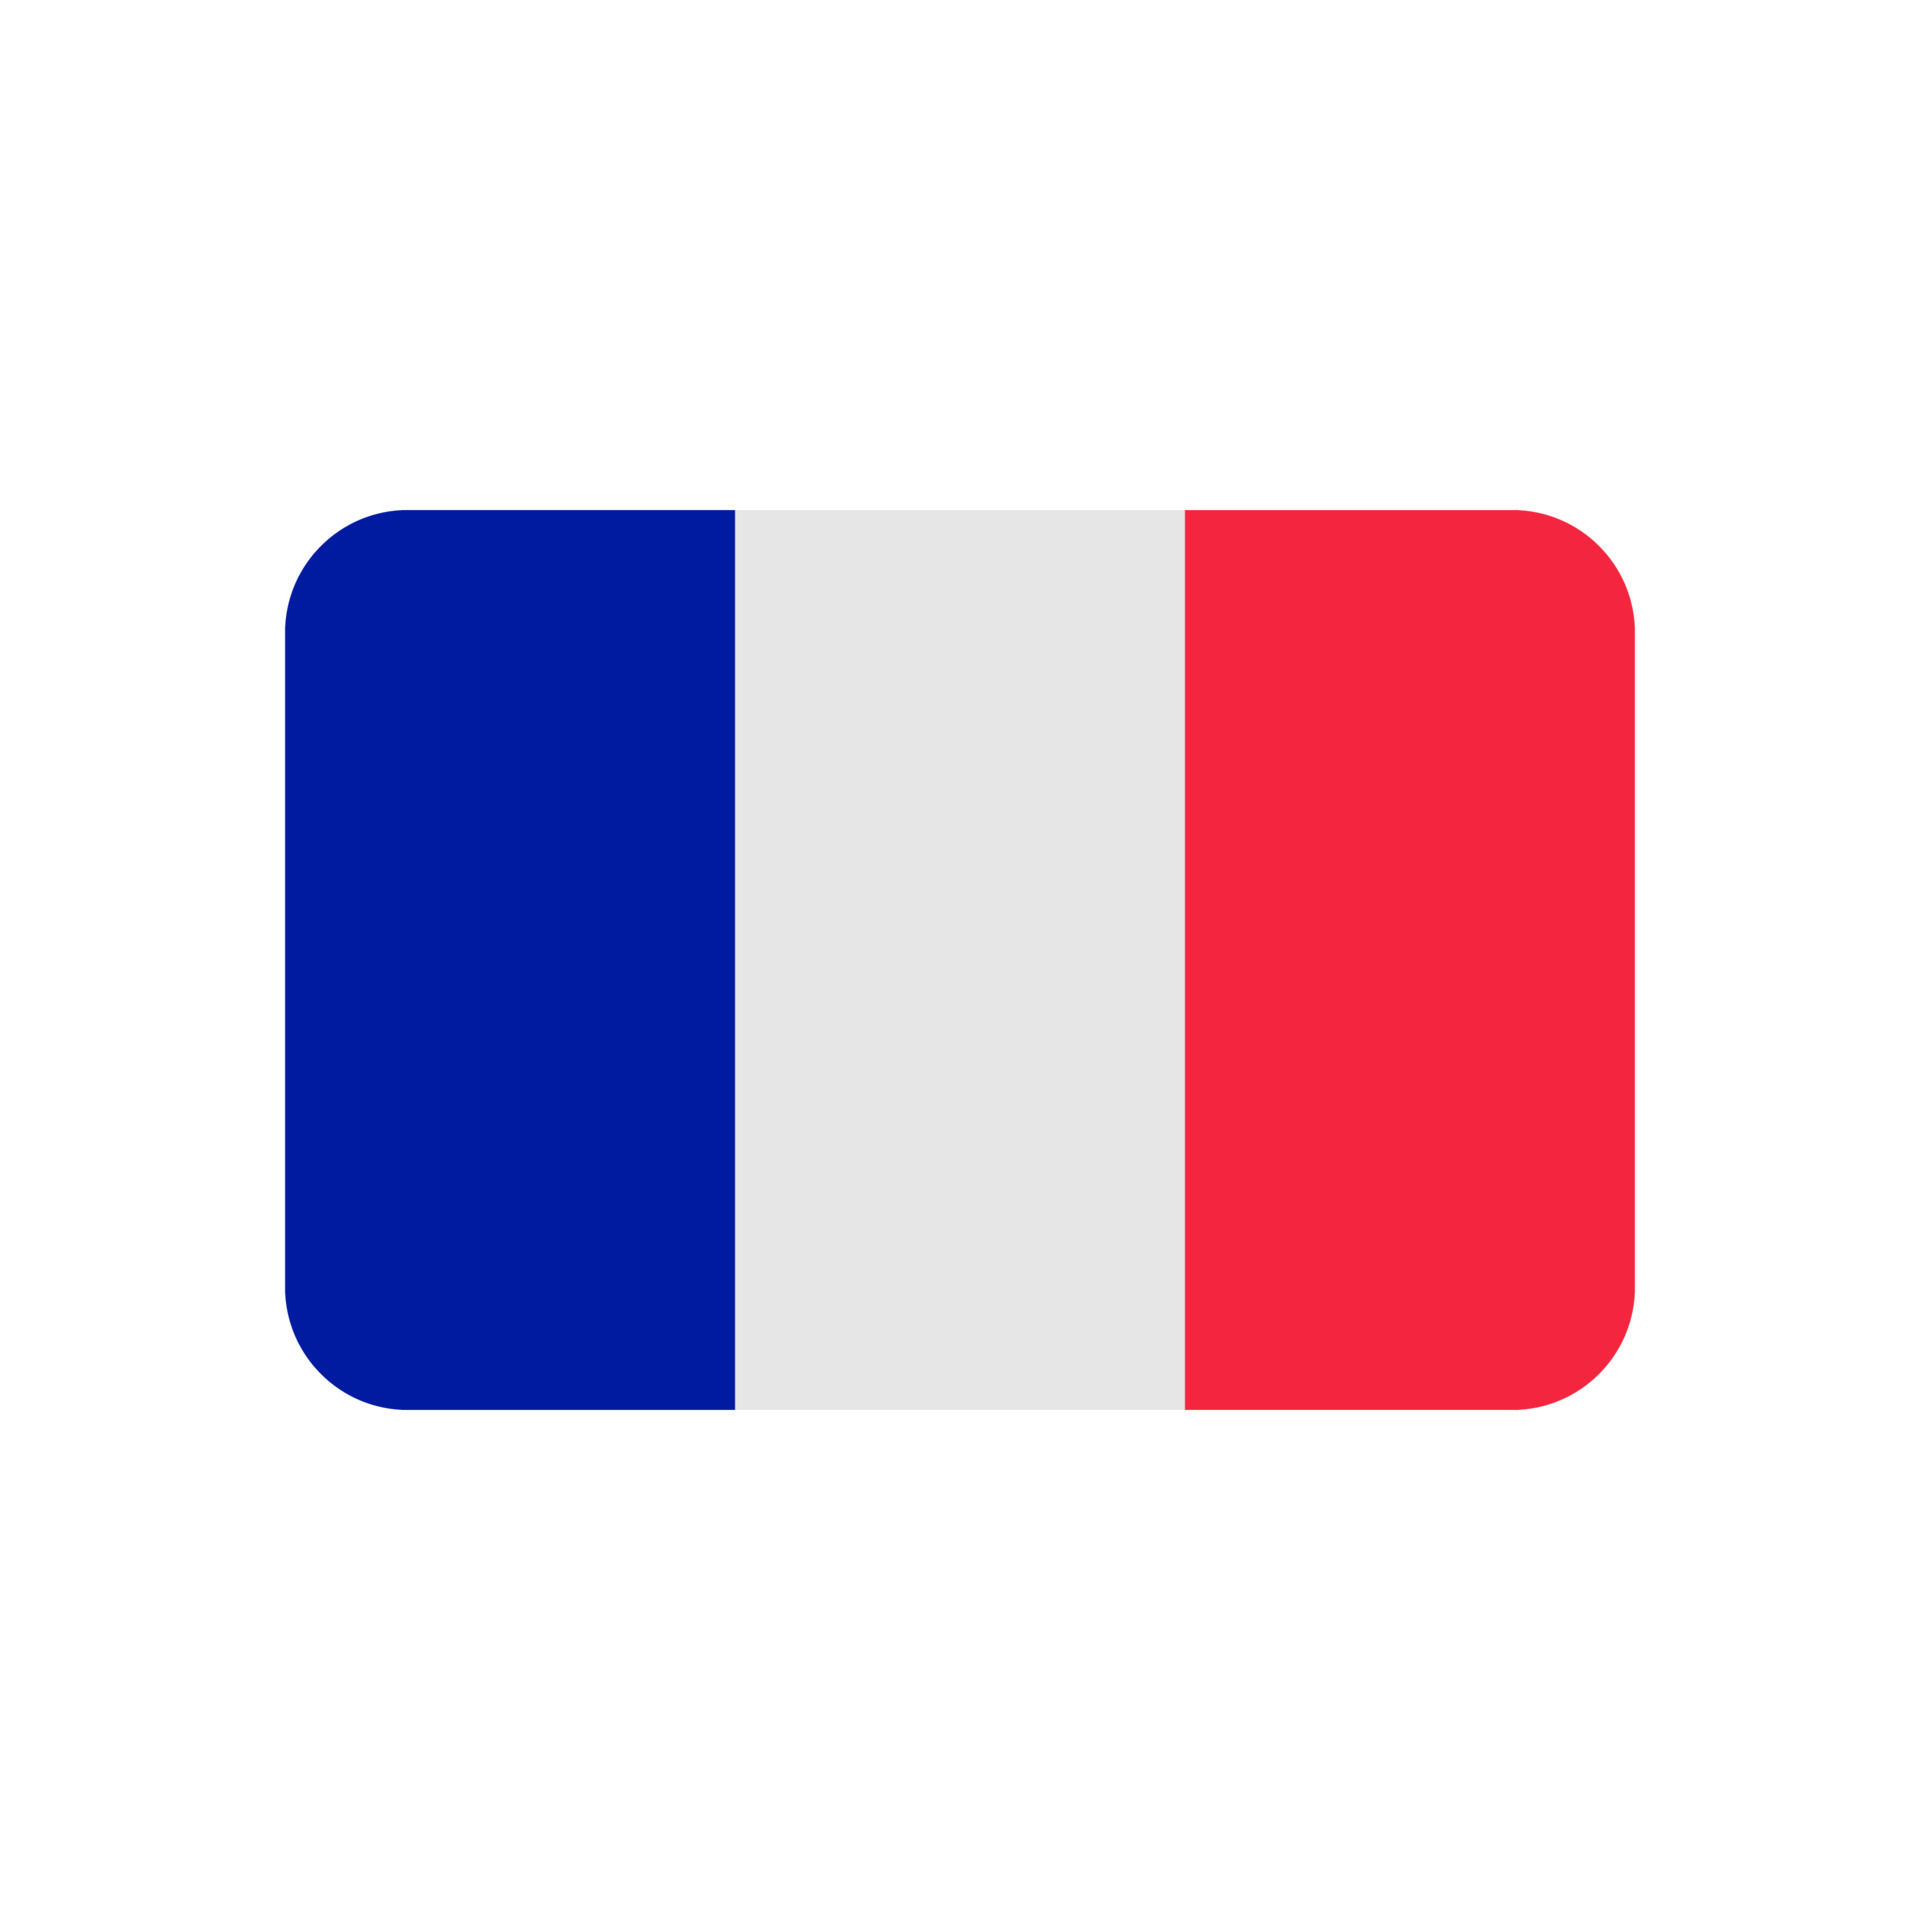 https://static.vecteezy.com/system/resources/previews/008/296/145/original/france-flag-icon-isolated-on-white-background-free-vector.jpg